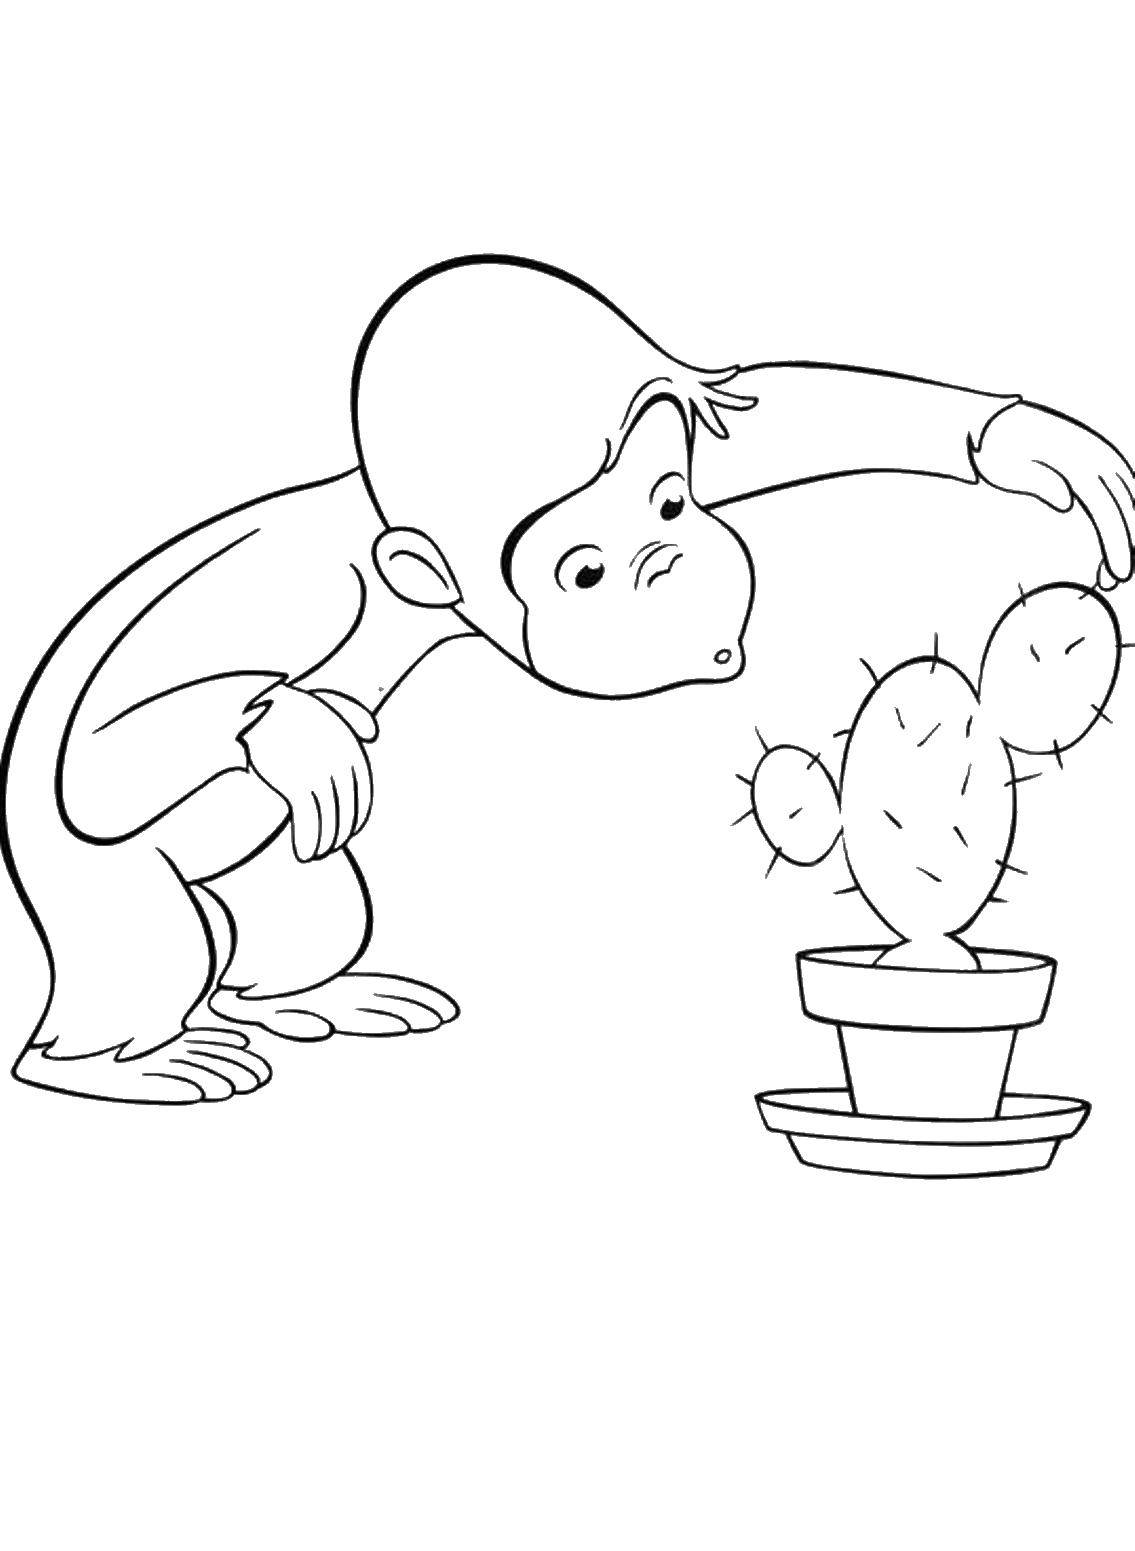 Coloring Monkey interesting cactus. Category coloring. Tags:  Cartoon character.